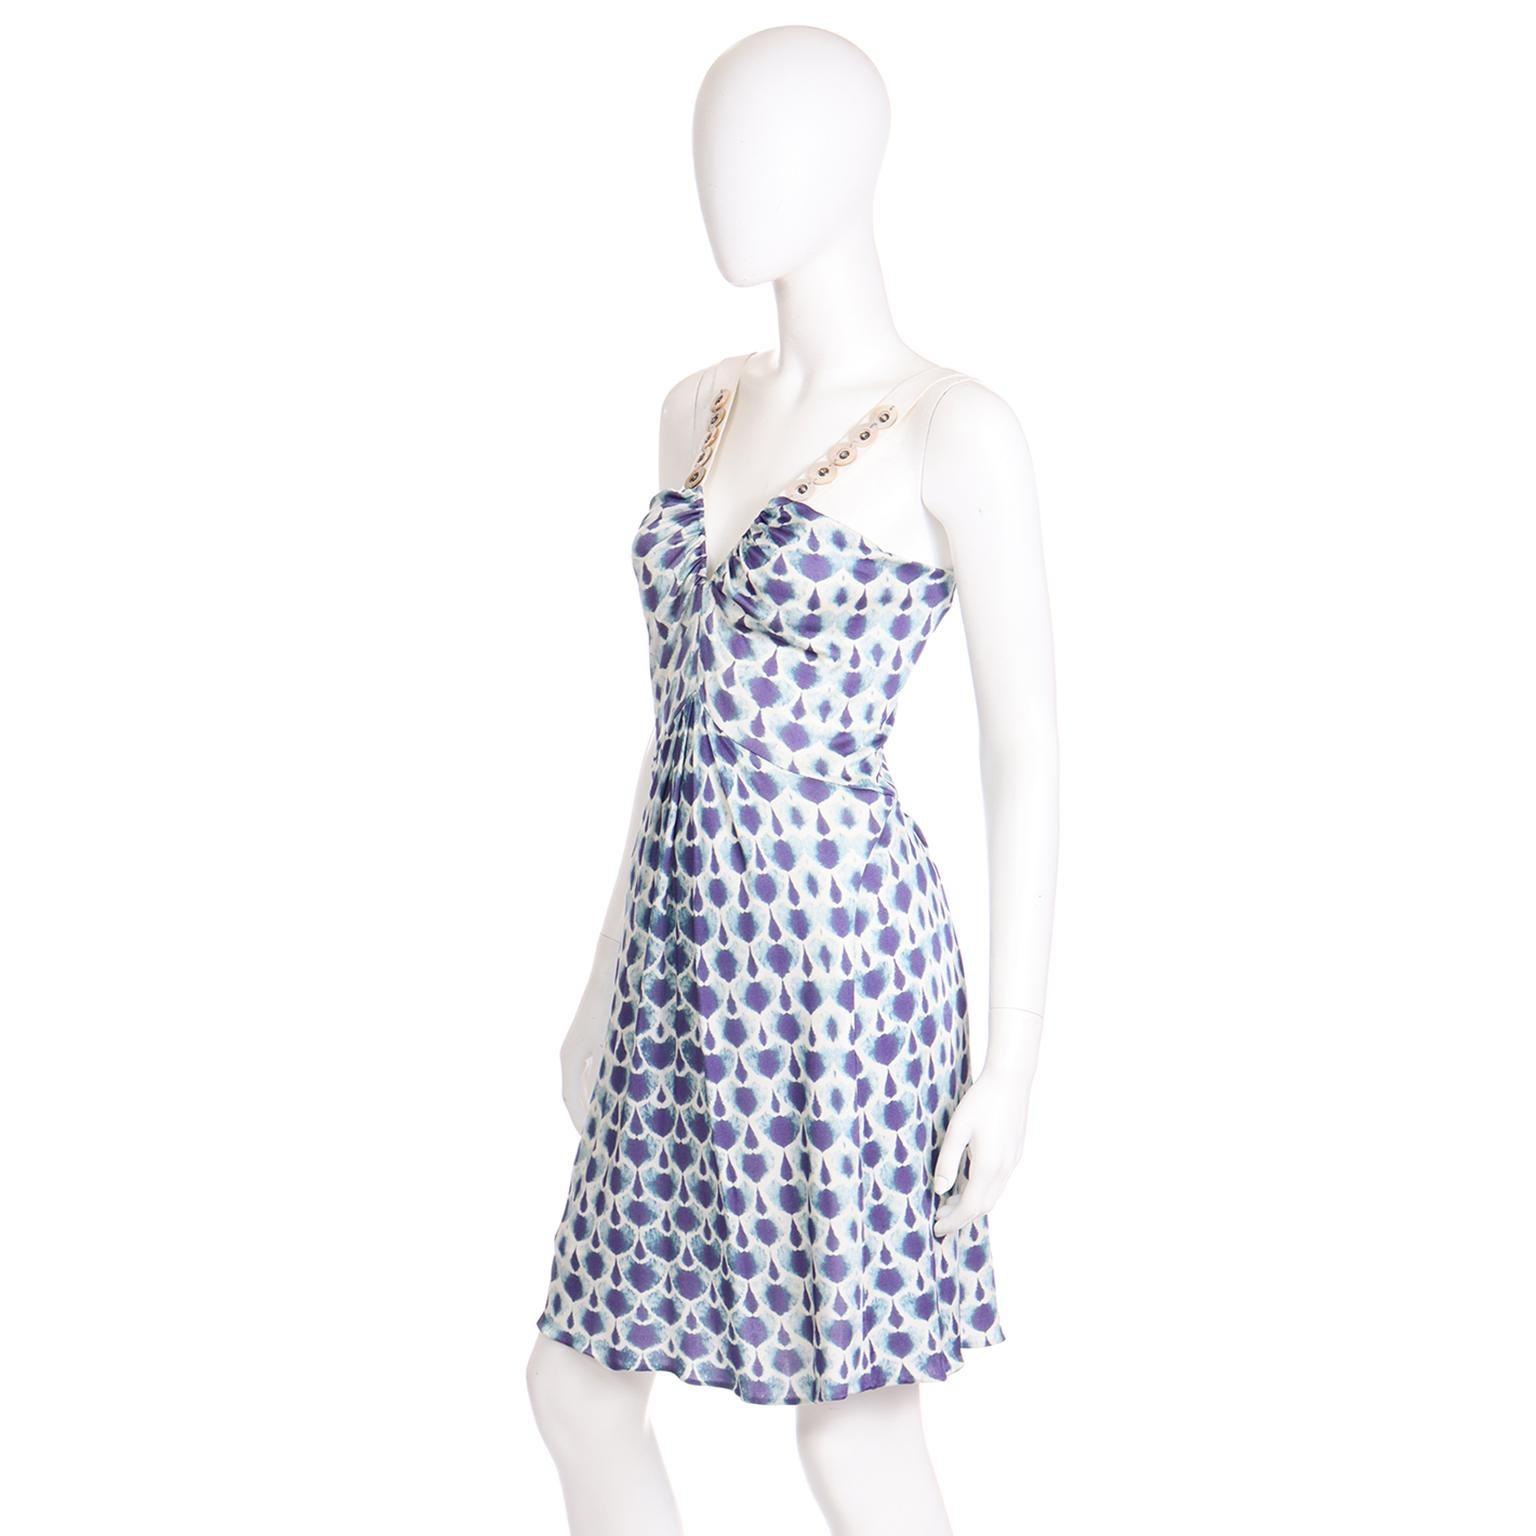 Alberta Ferretti Vintage Early 2000s Blue and White Low V Dress W Shell Details 2